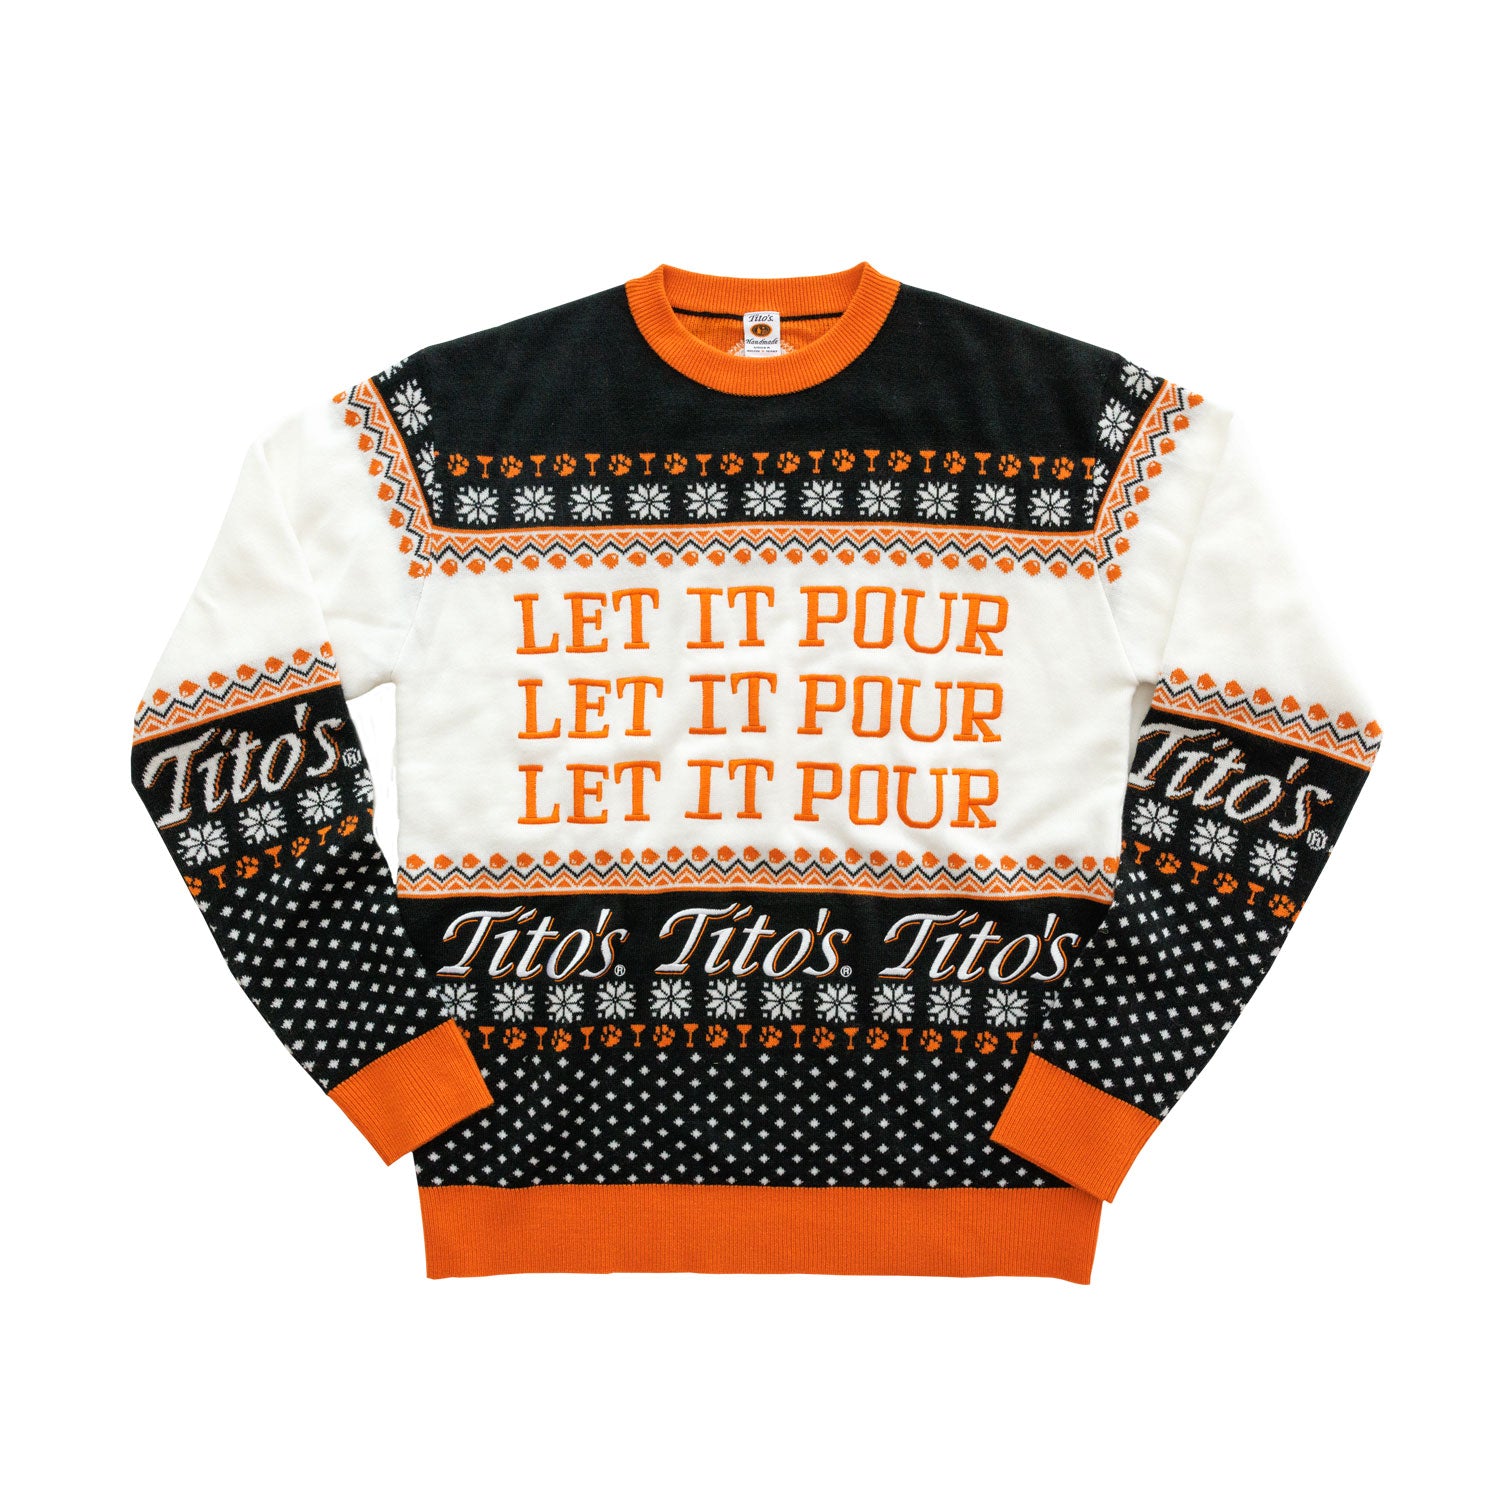 Front view of black, orange, and white pullover with snowflake designs, martinis, paw prints, Tito's wordmark, Let It Pour text